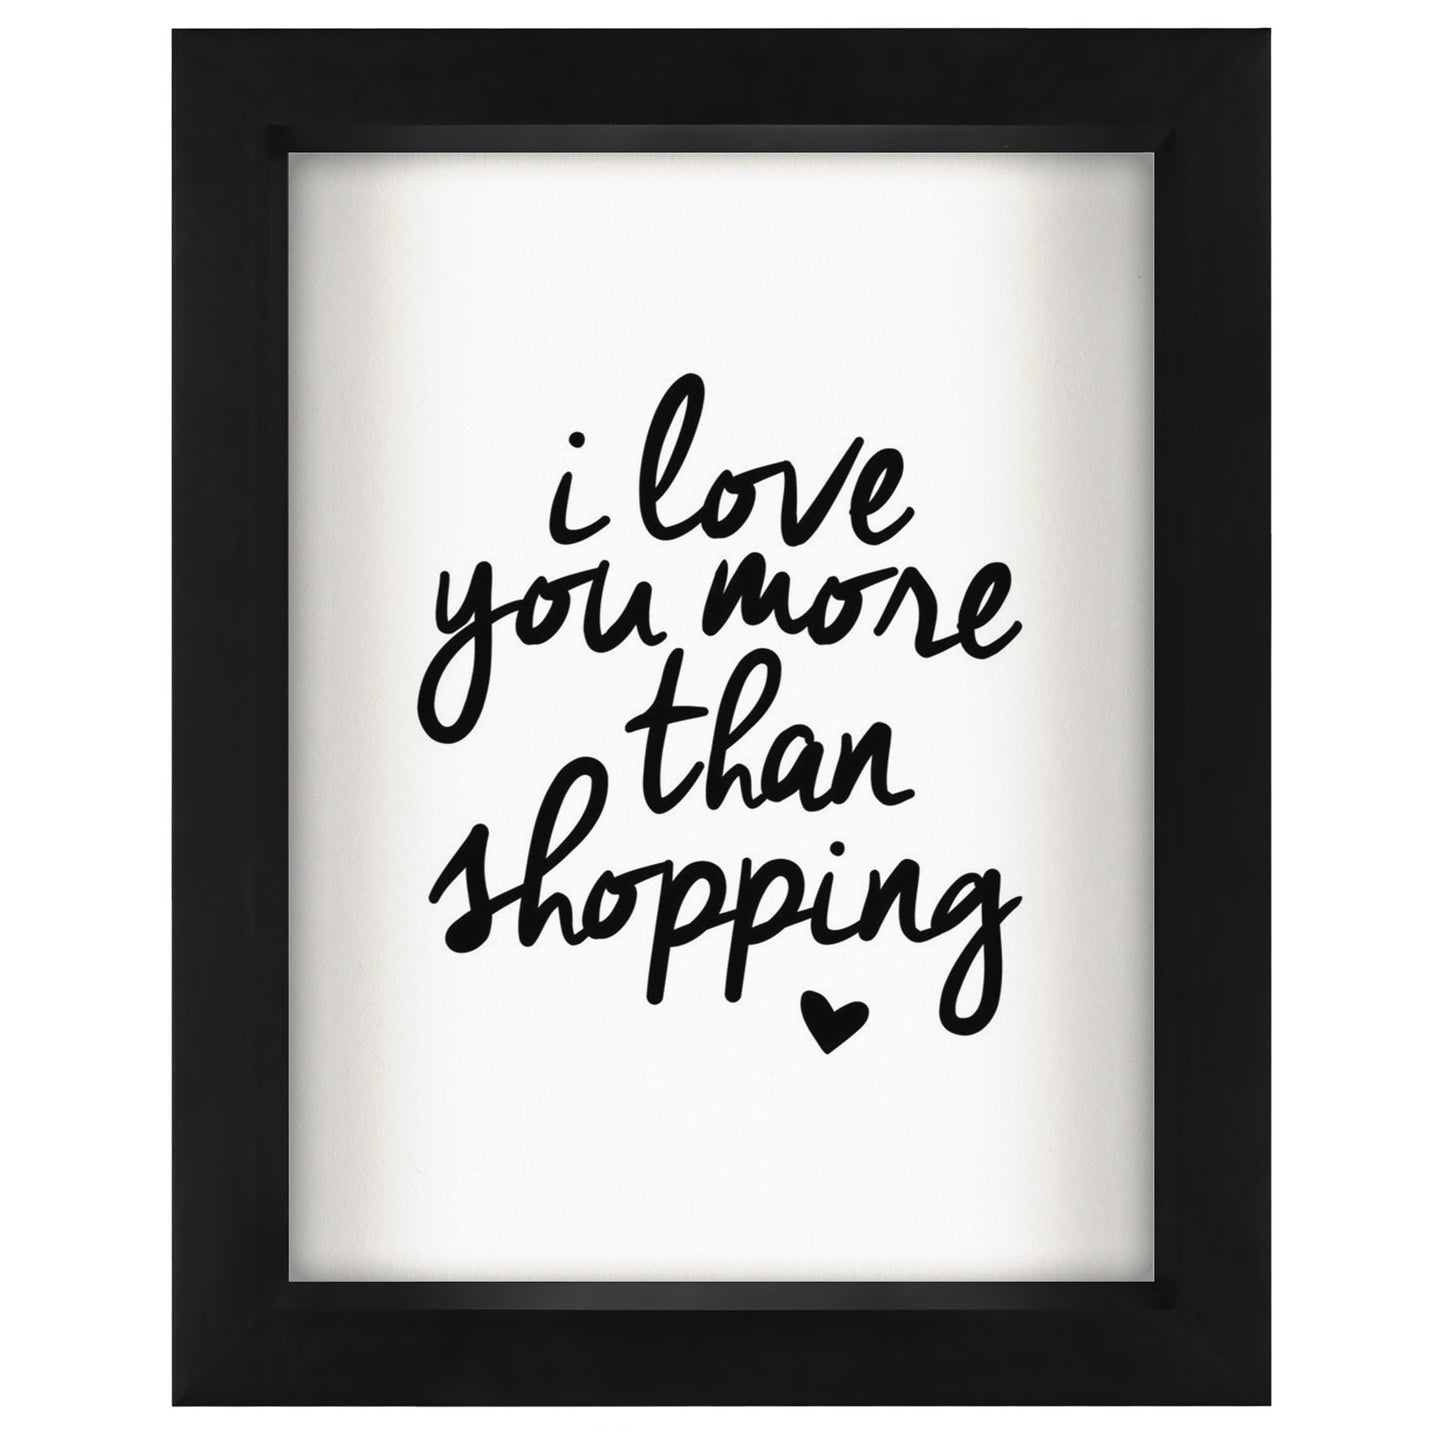 I Love You More Than Shopping By Motivated Type - Shadow Box Framed Art - Americanflat